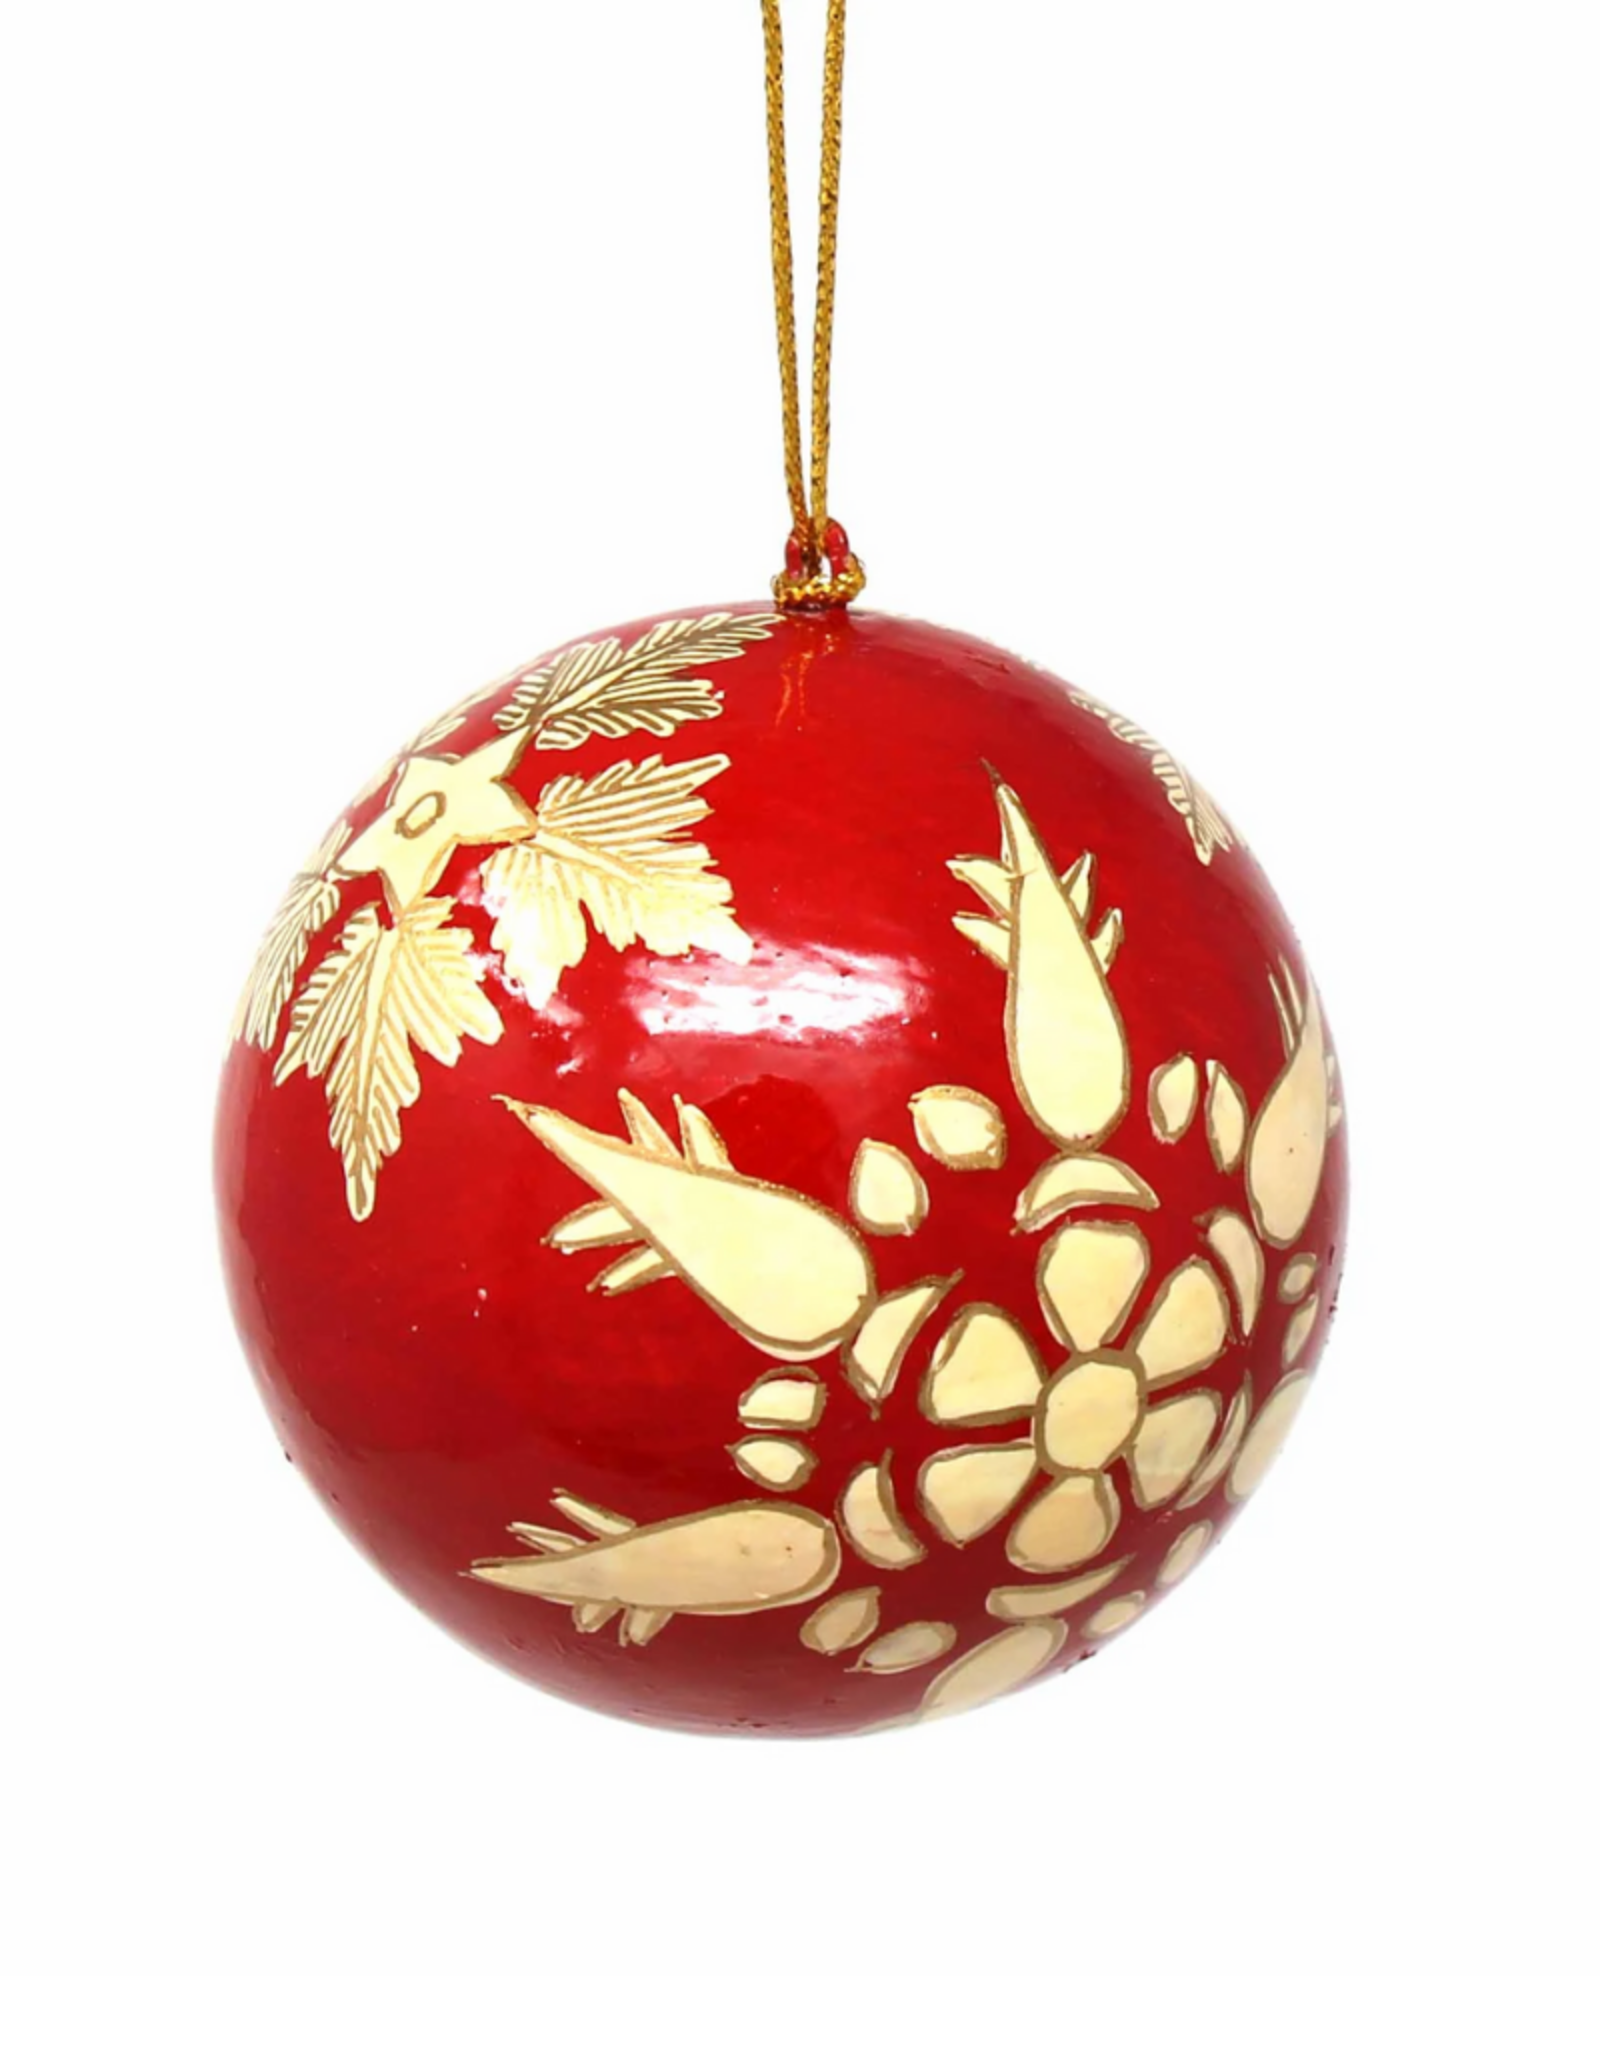 Global Crafts Ornament, Handpainted Gold Snowflakes - India